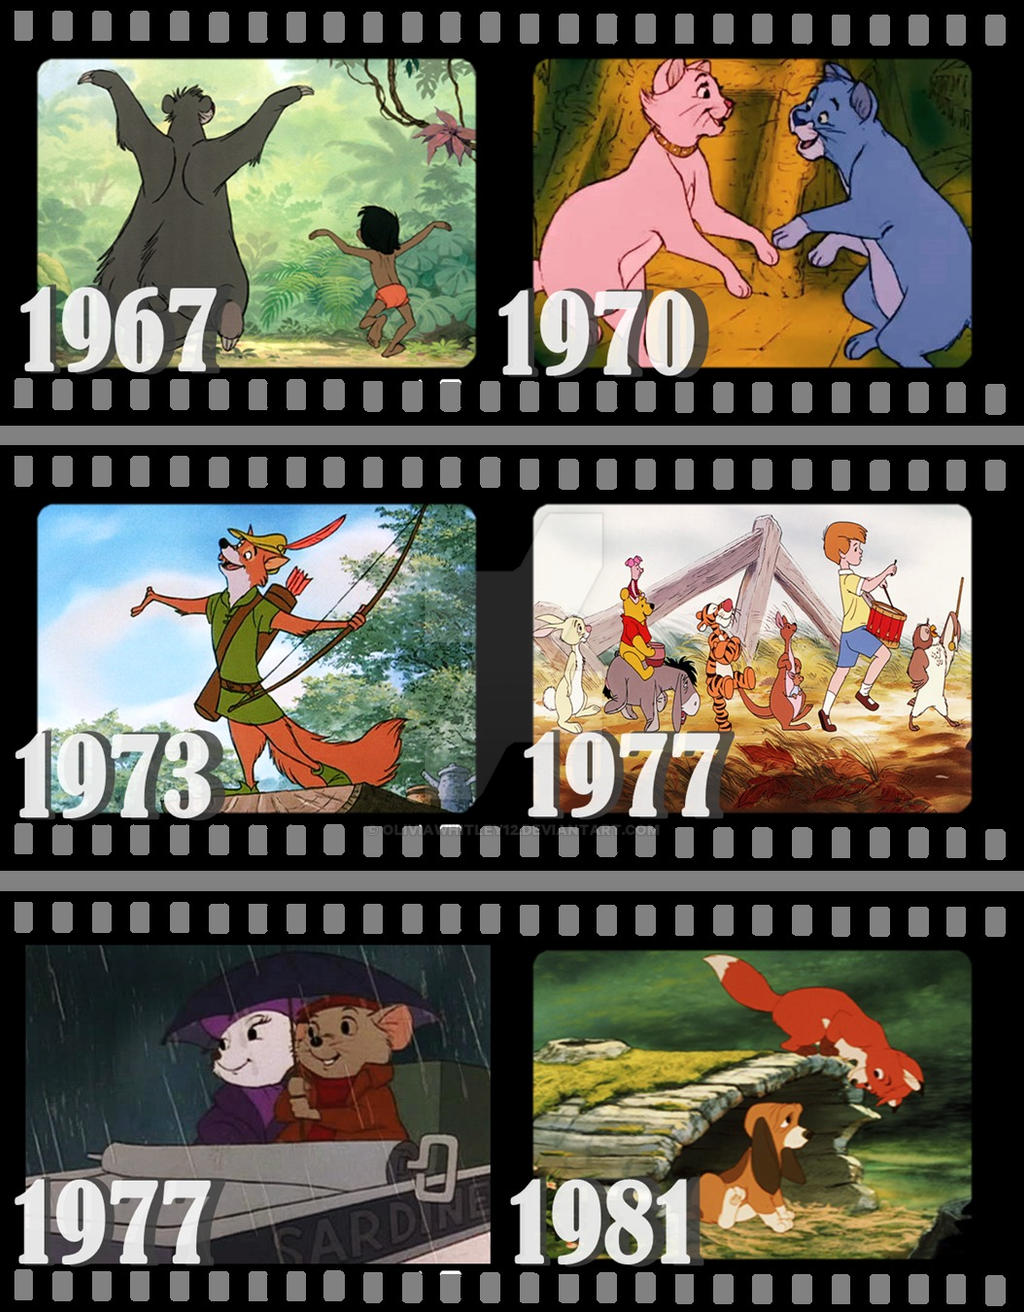 Disney Animated Movies 1967-1981 by OliviaWhitley12 on DeviantArt